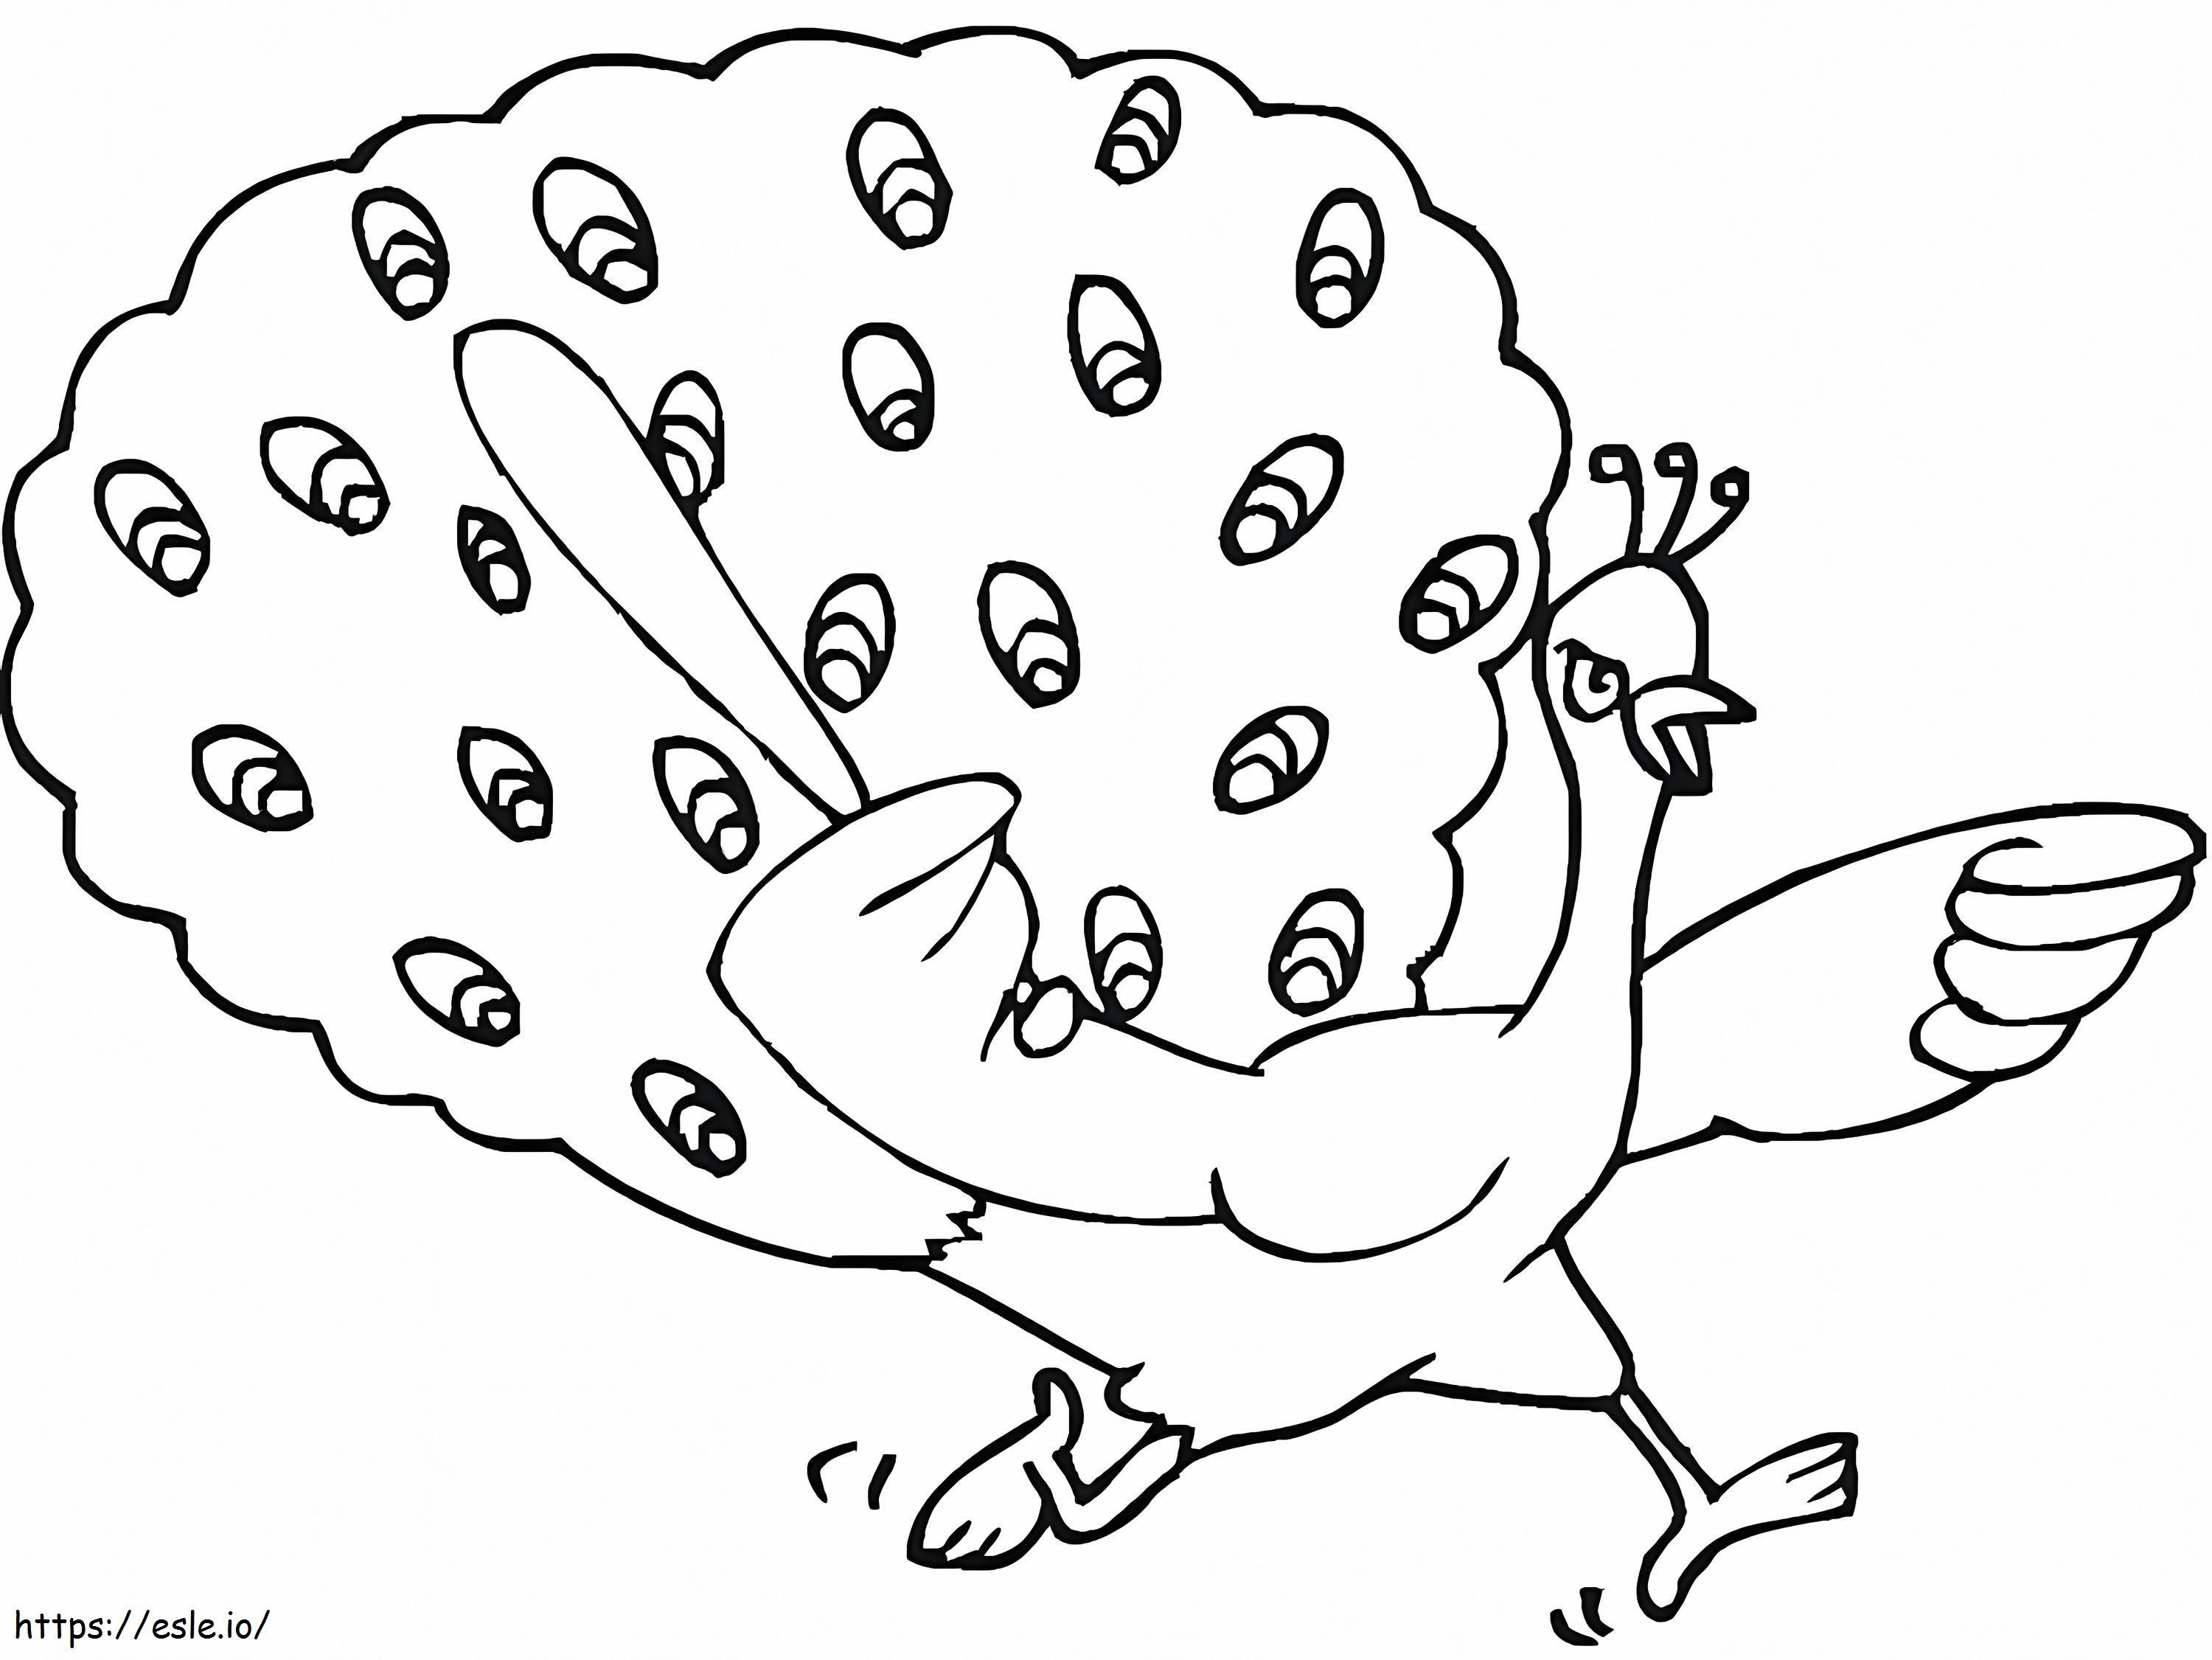 Angry Peacock coloring page